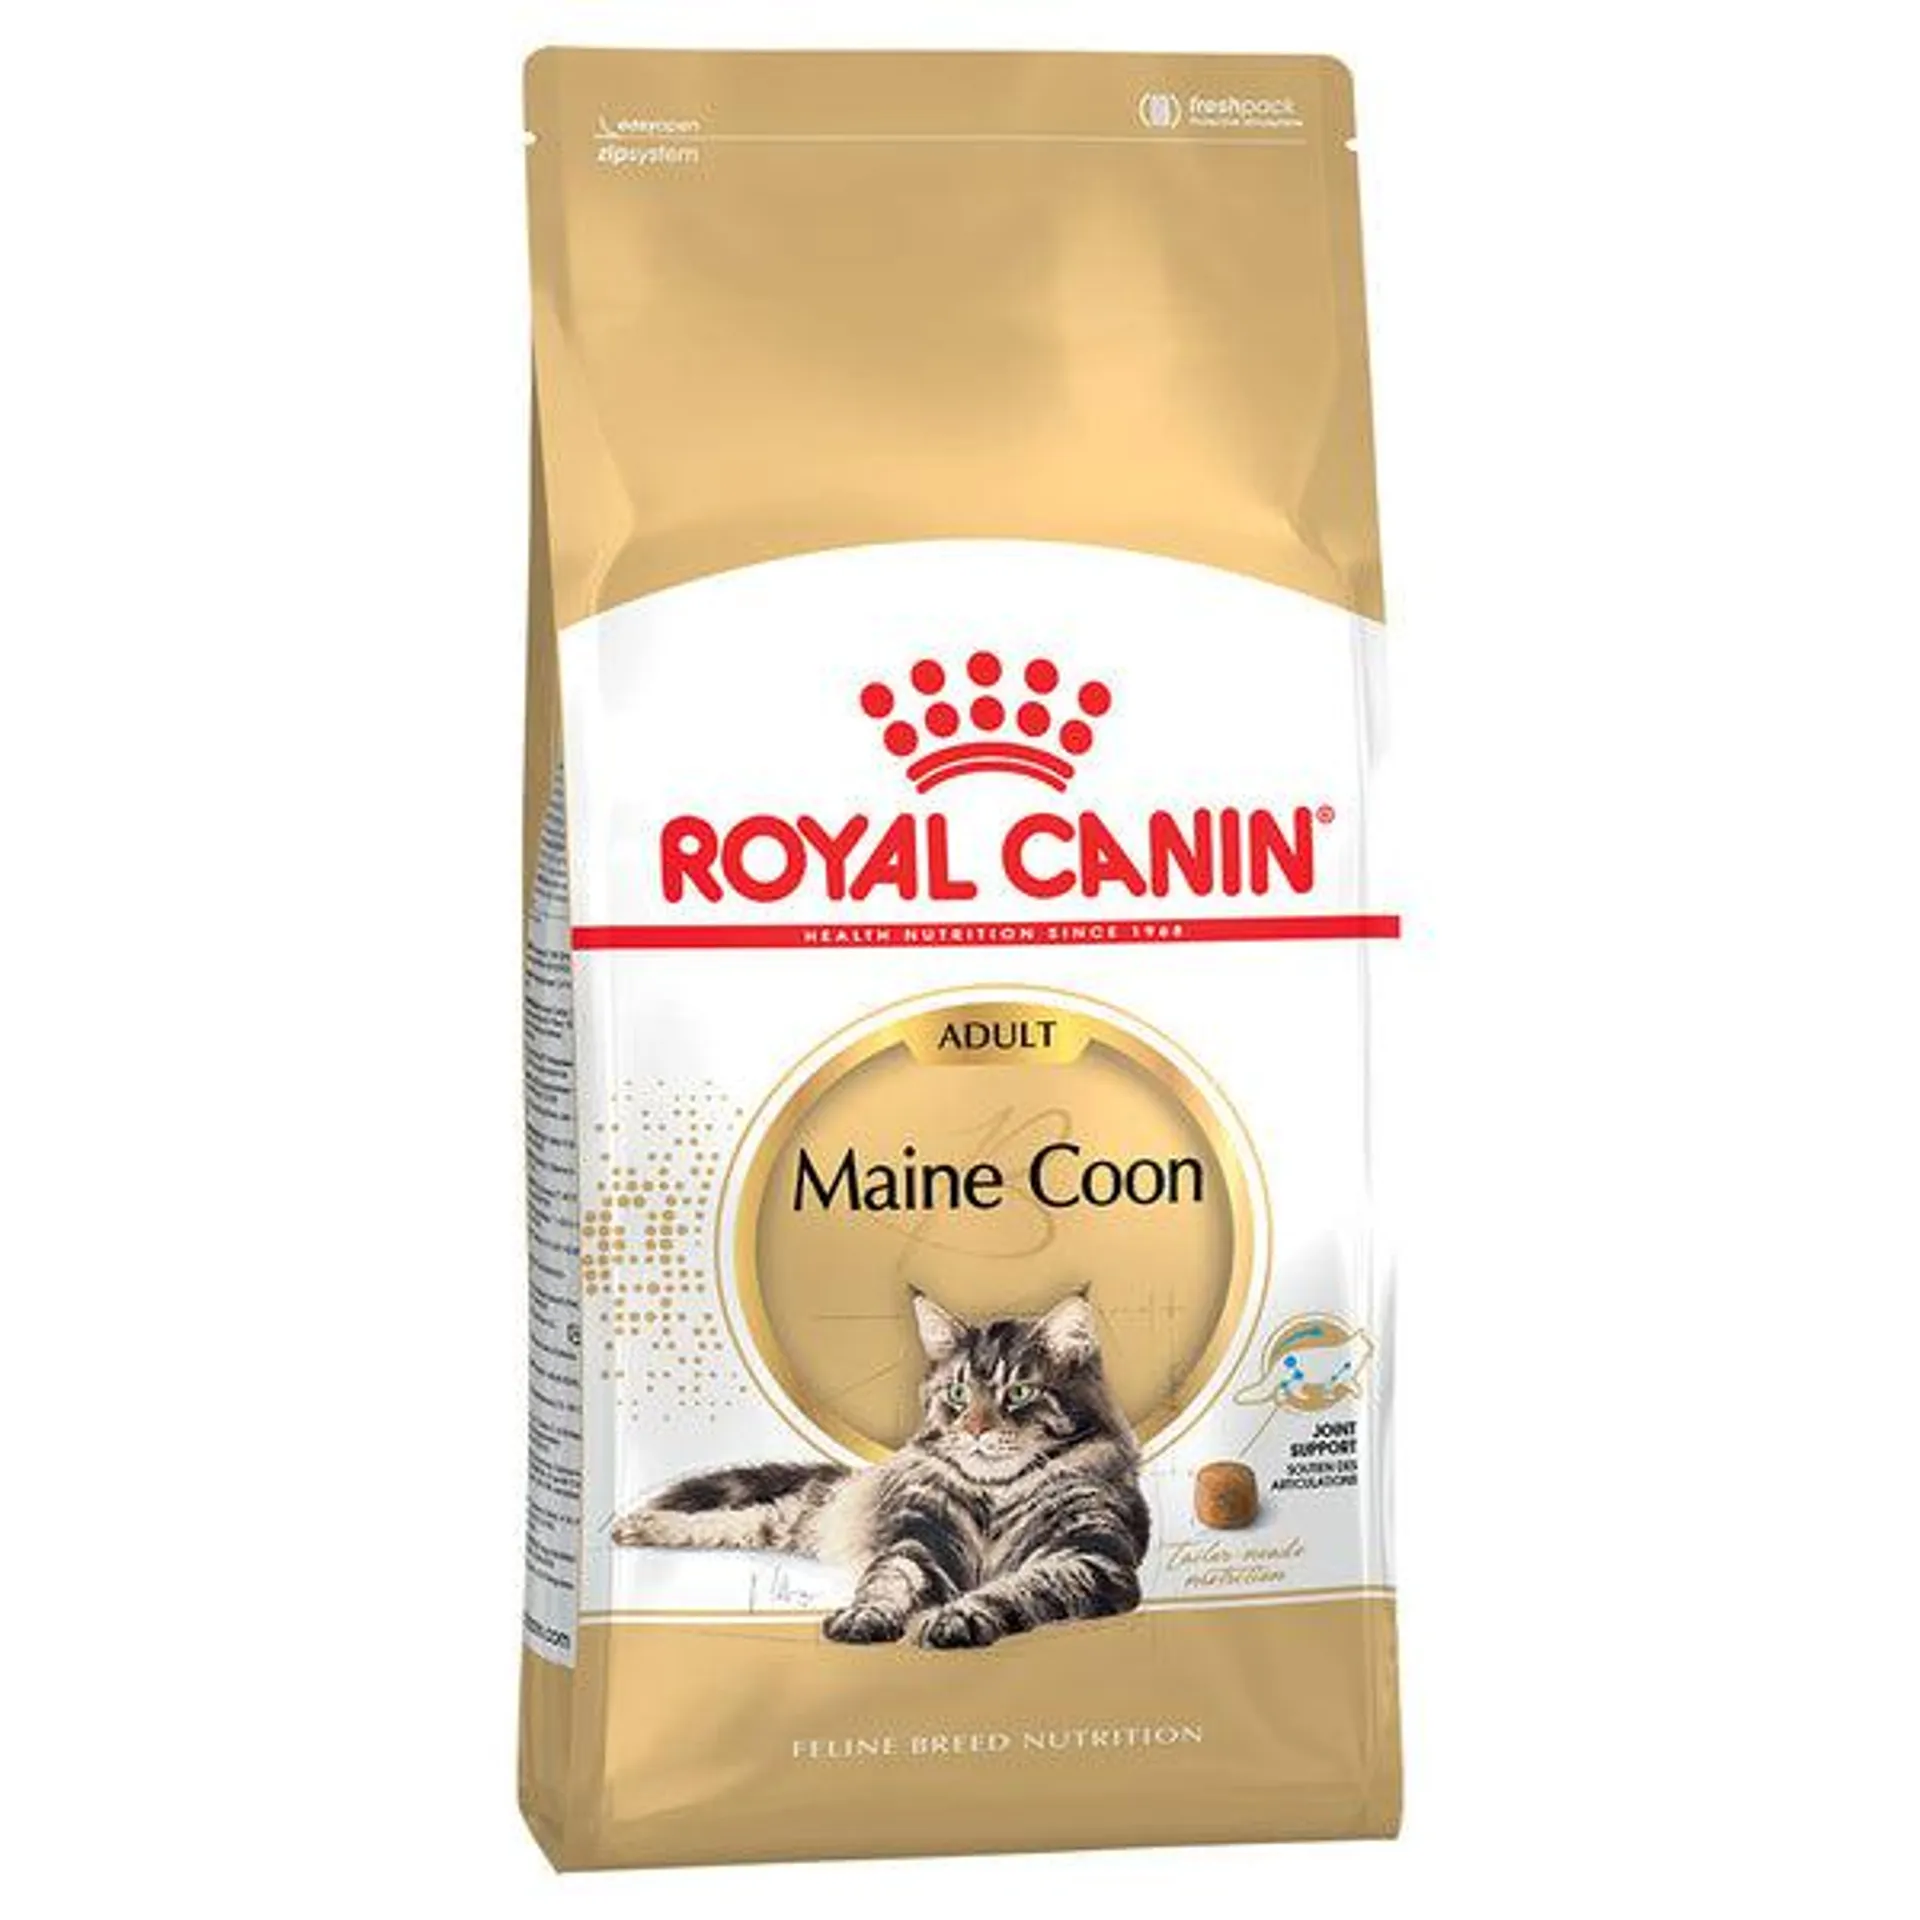 Royal Canin - Maine Coon Breed Adult Cat Dry Food (10kg)